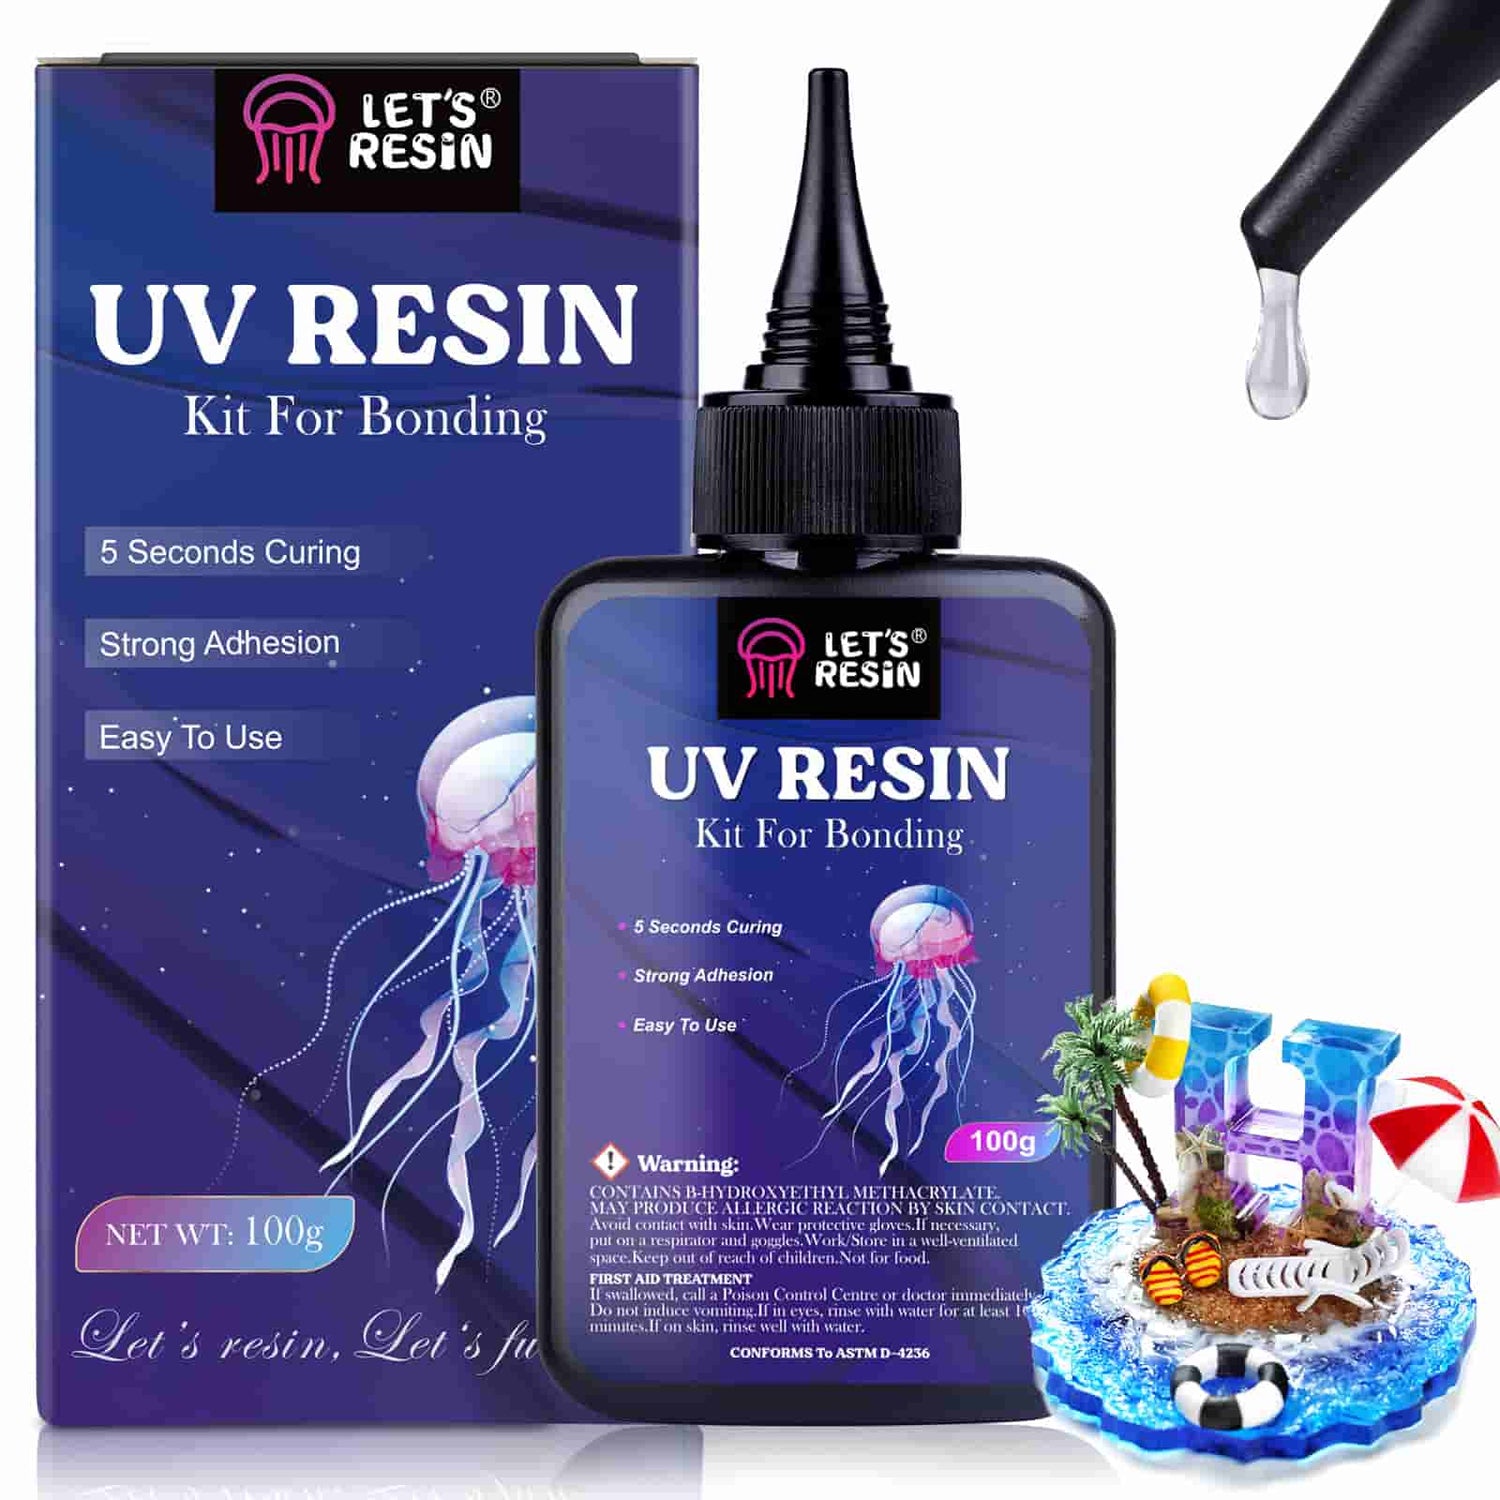 Clear UV Resin (Soft Type) - 100g